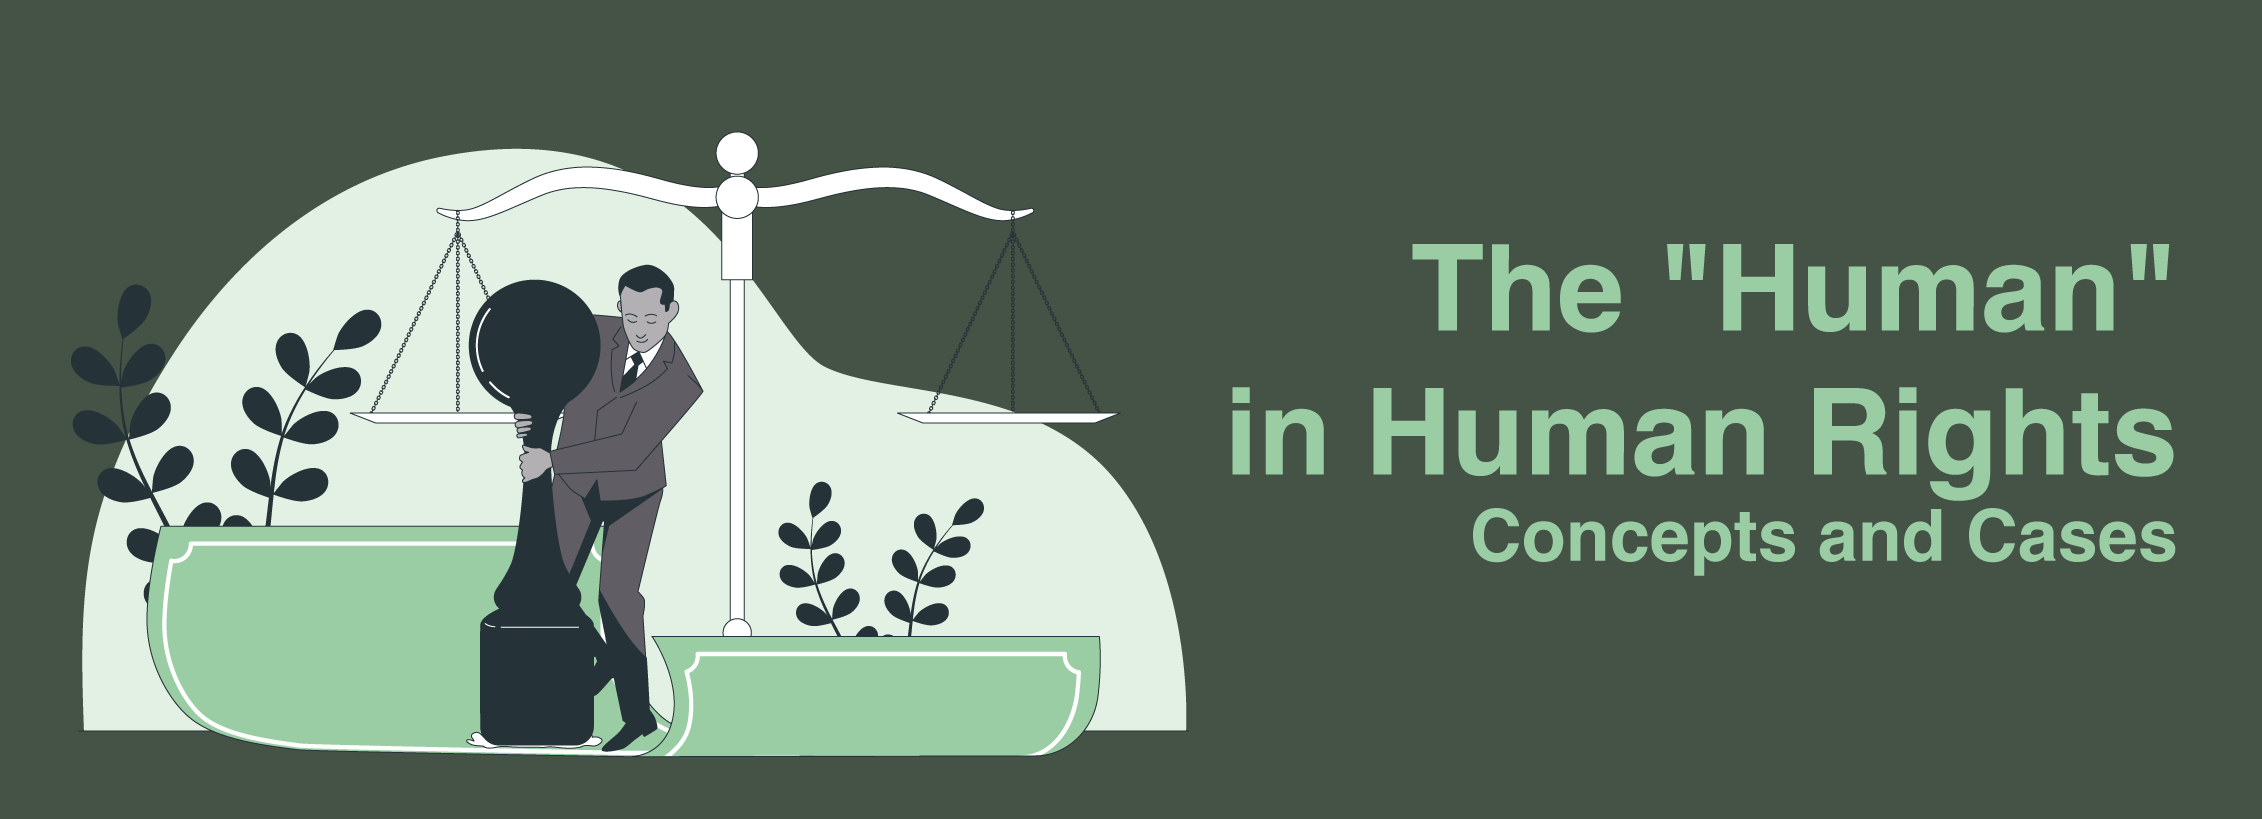 The "Human" in Human Rights: Concepts and Cases